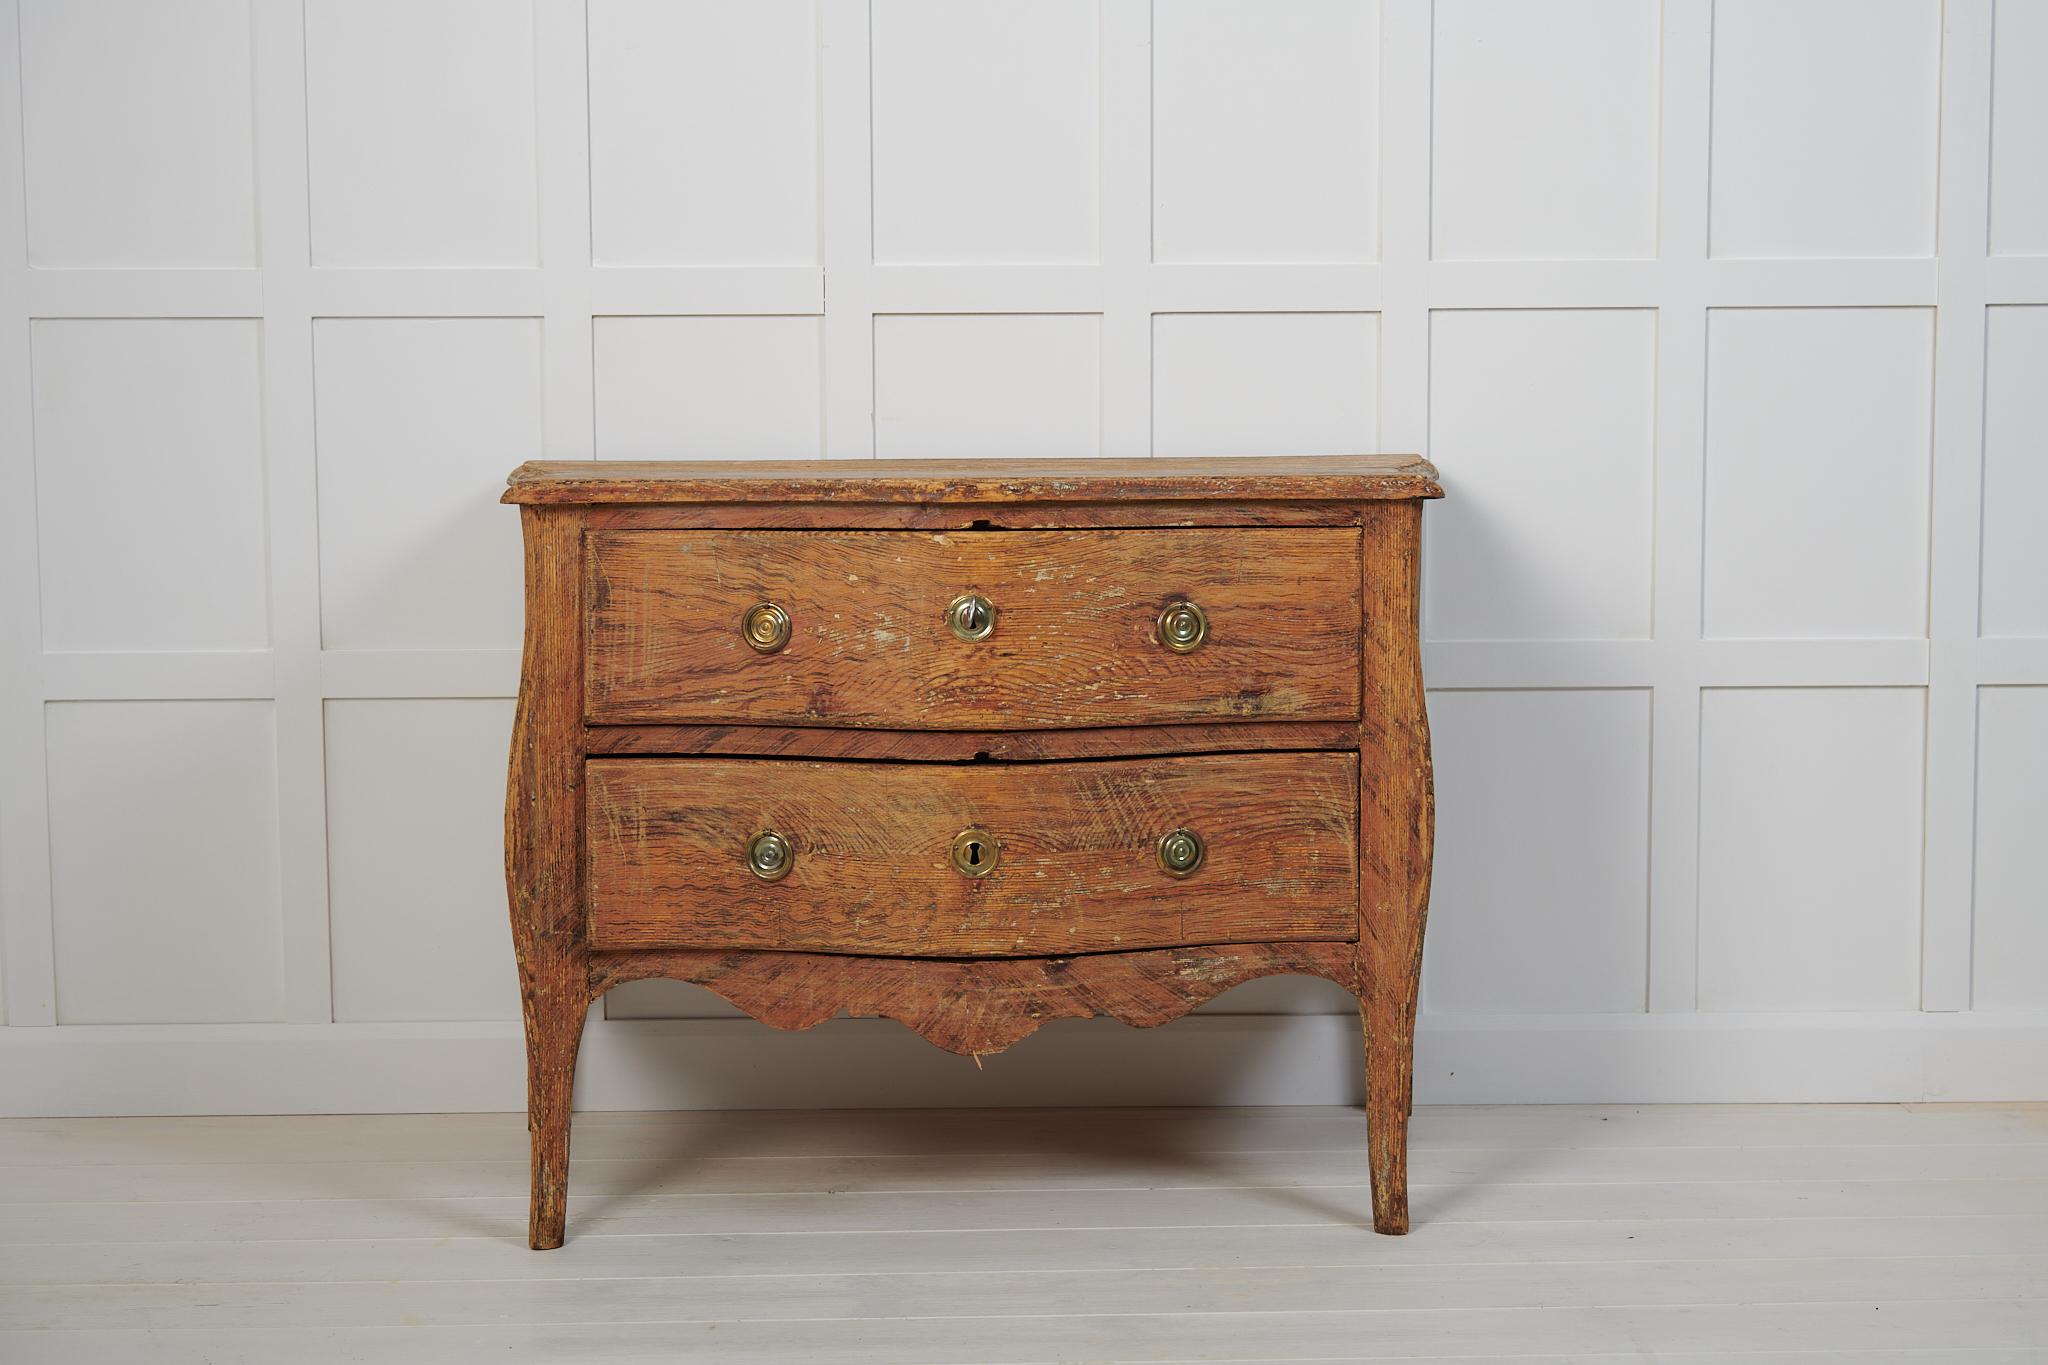 Rare genuine antique Swedish rococo chest of drawers from northern Sweden. The chest is made by hand in Swedish solid pine around 1770. It has curved drawers and table top. The chest has traces of the original paint which has authentic distress and